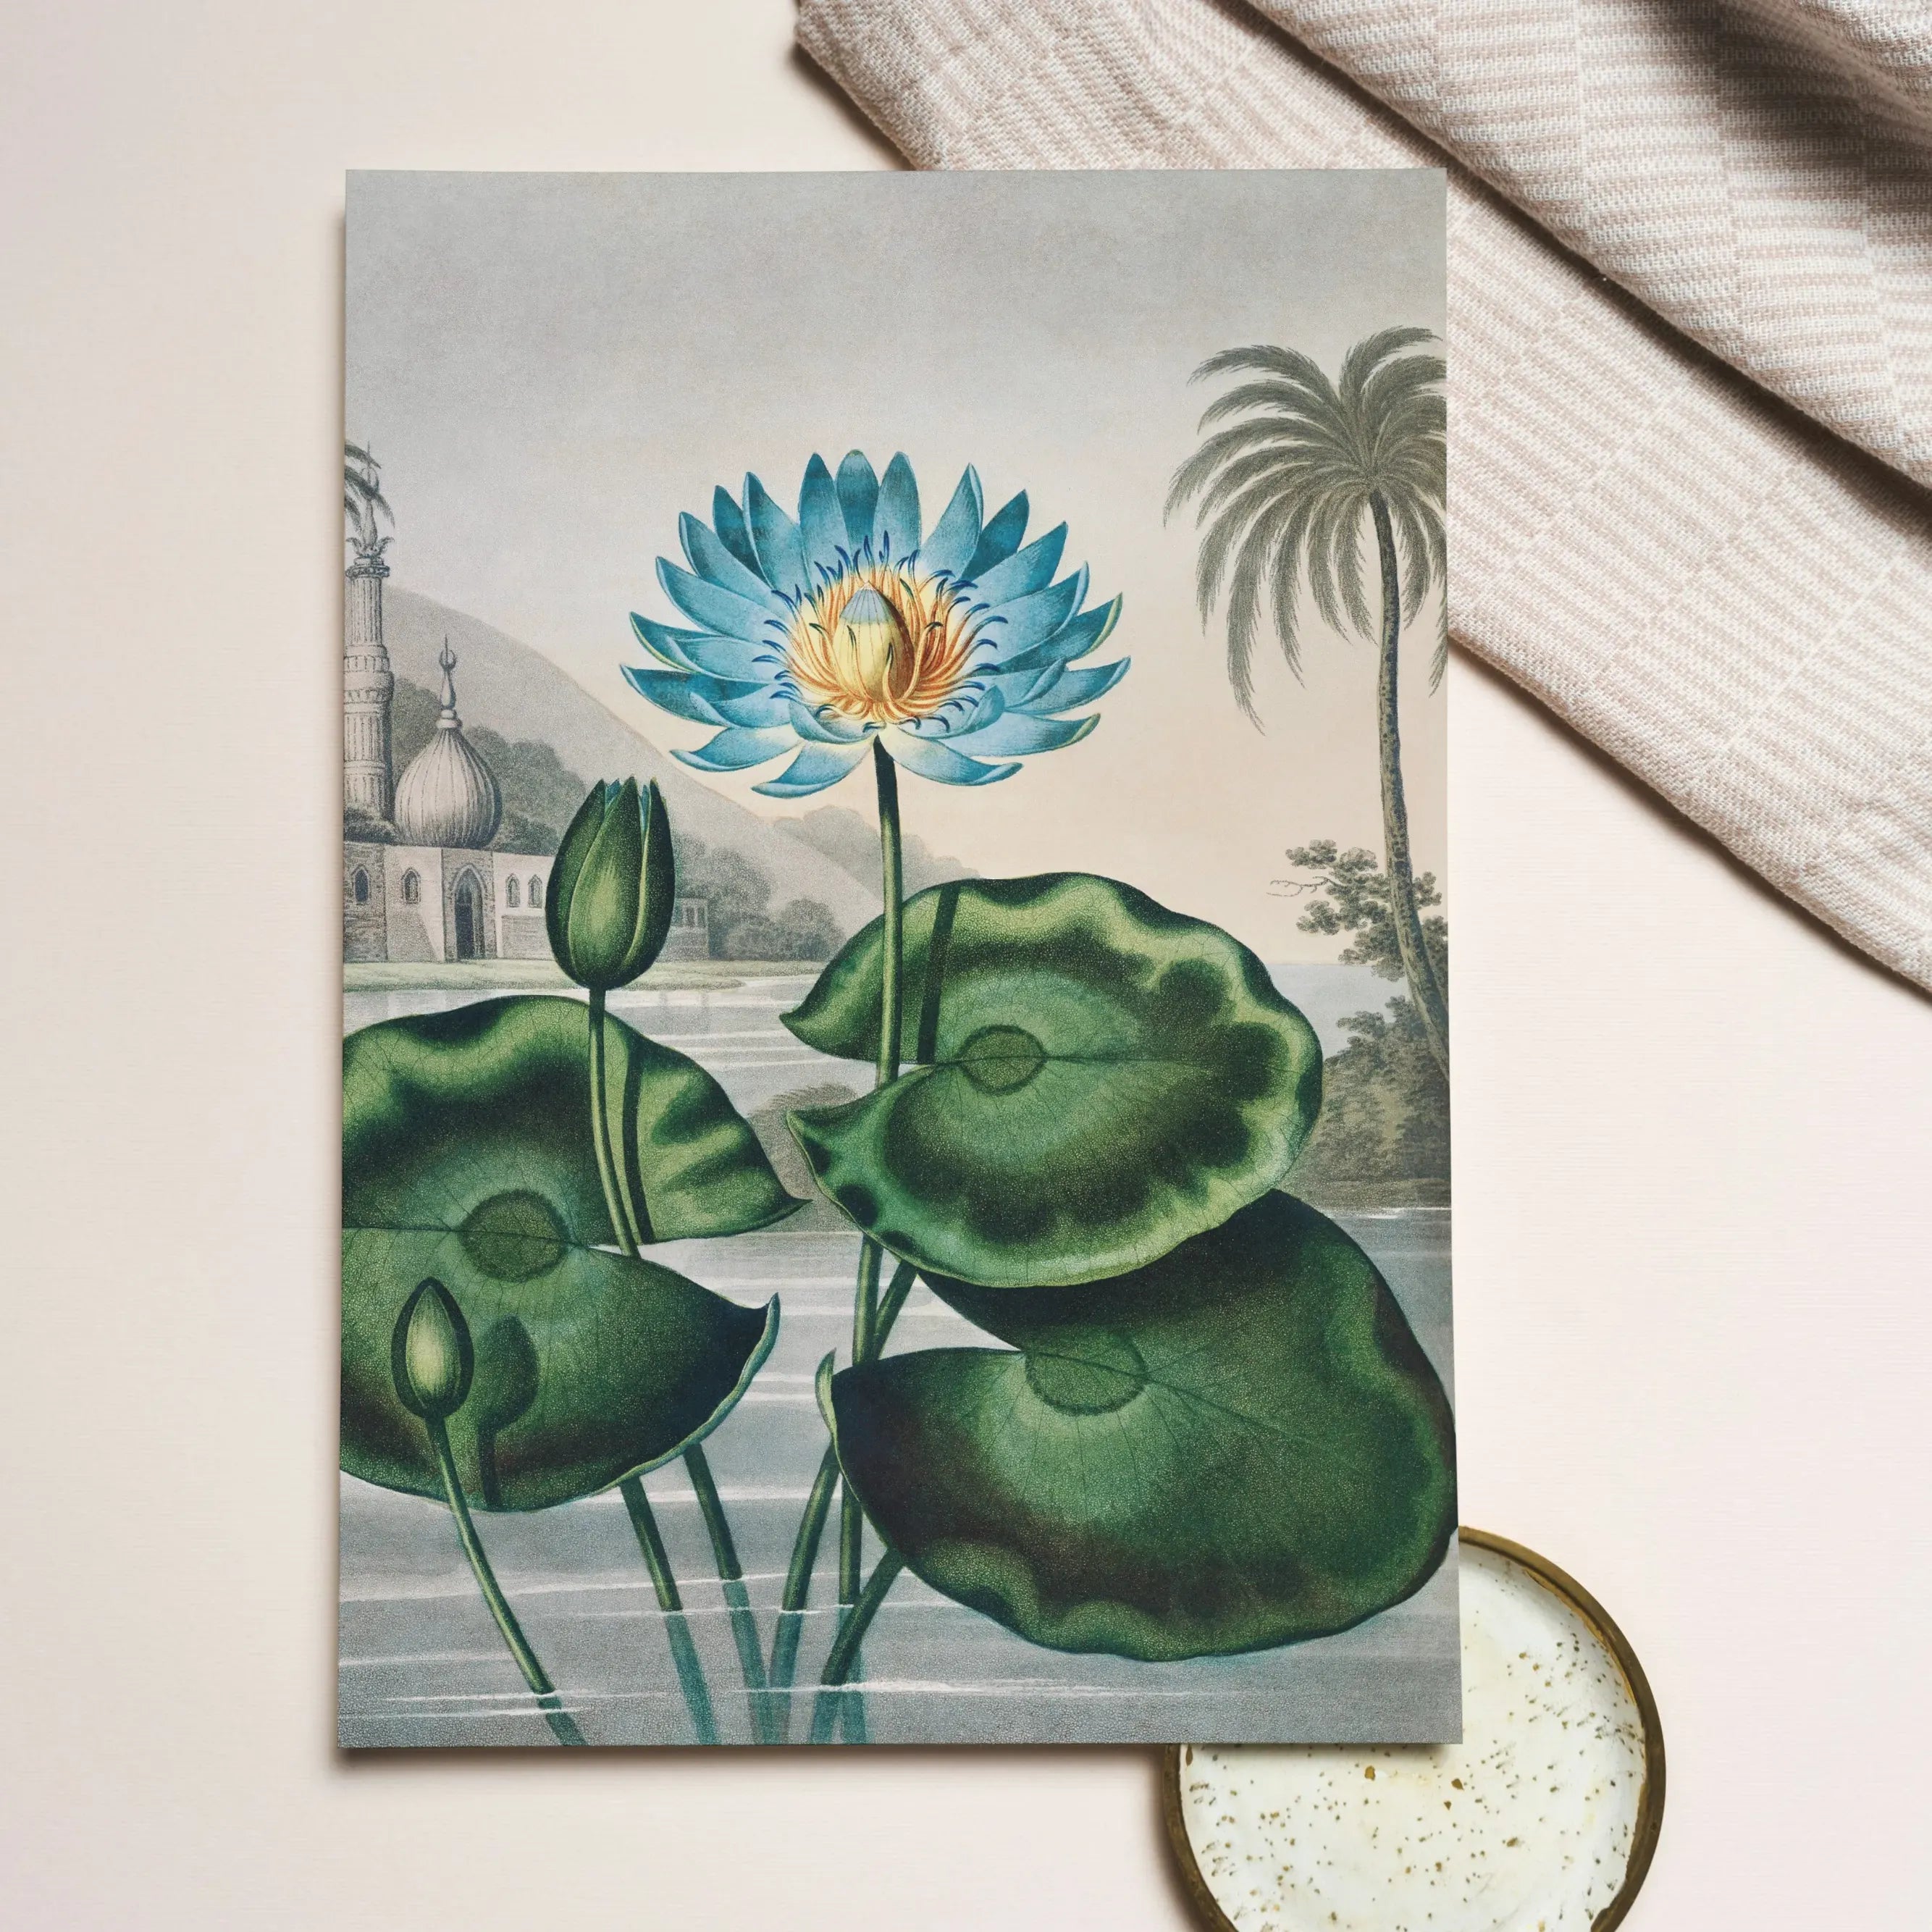 Blue Egyptian Water Lily By Robert John Thornton Greeting Card - A5 Portrait / 1 Card - Greeting & Note Cards